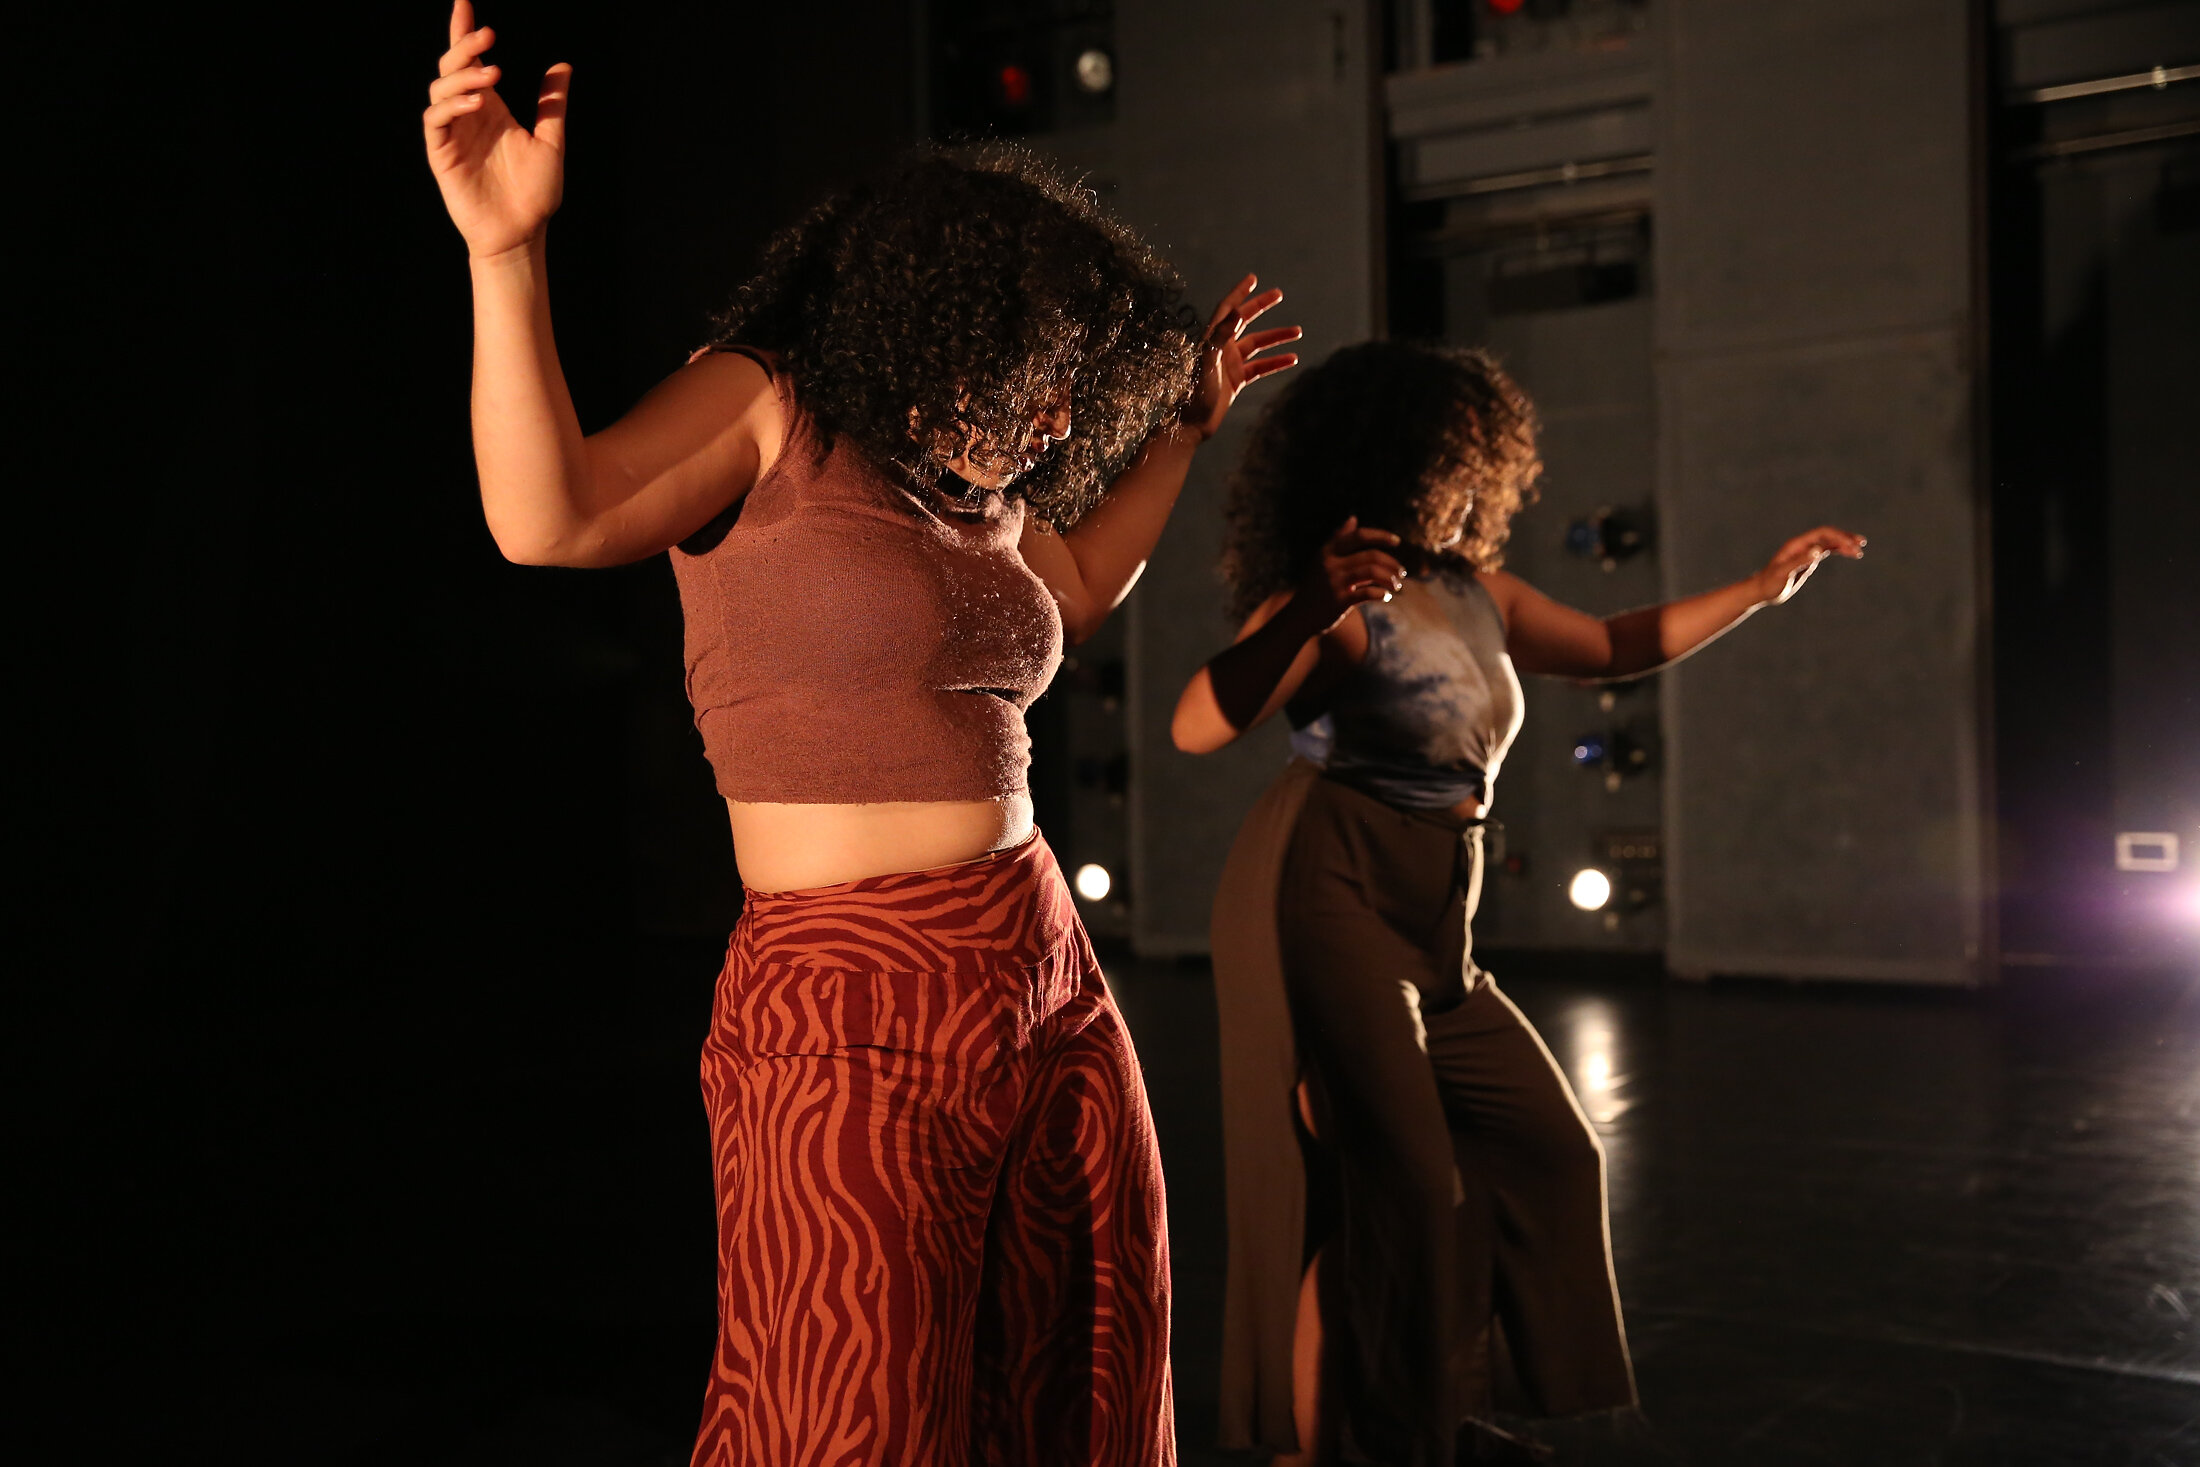 "These are artists to be reckoned with... an unrivaled dance theater experience."